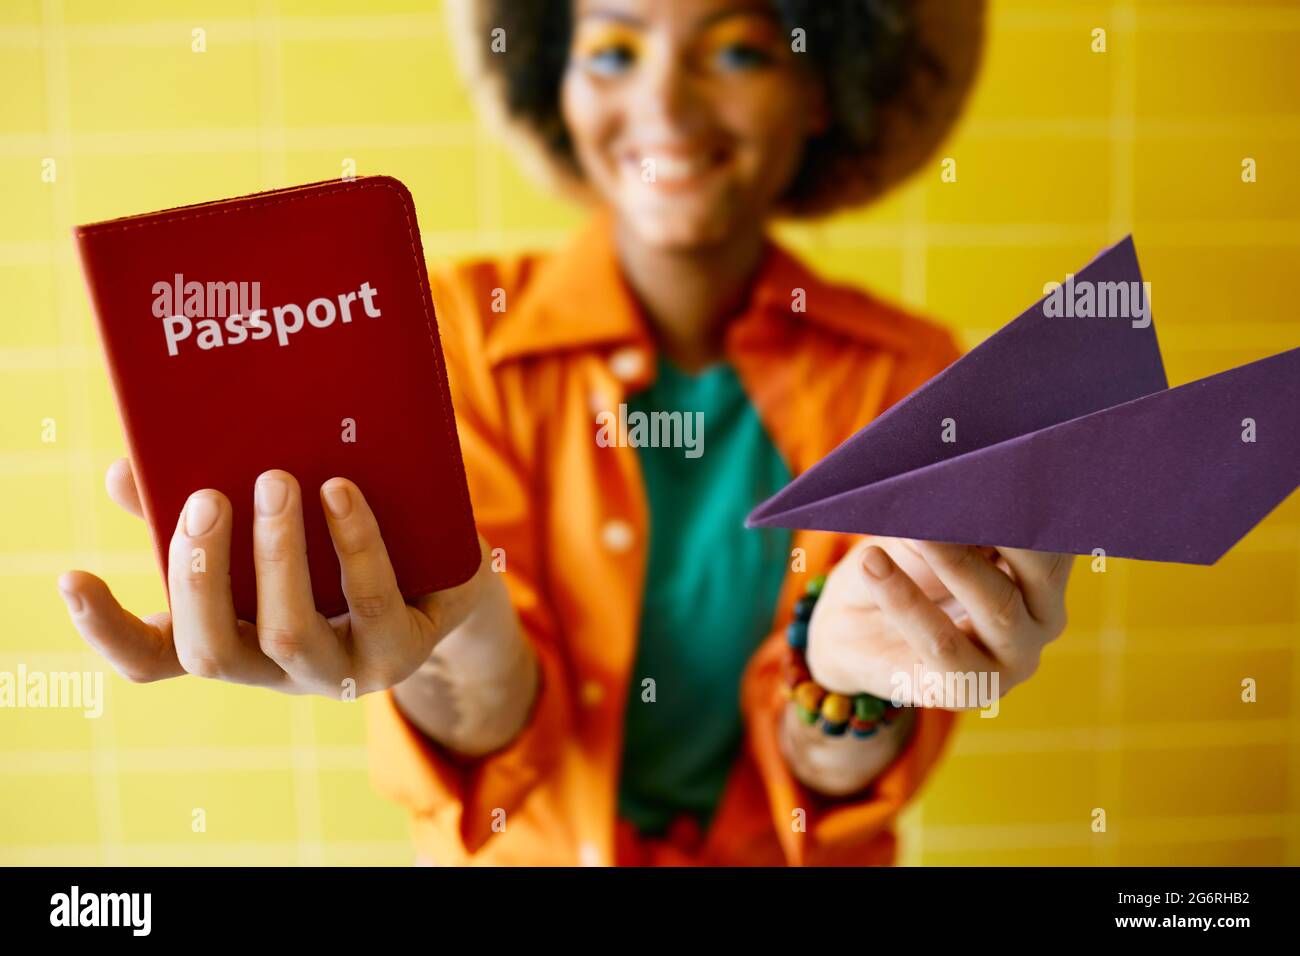 International passport and paper airplane in hands of a young female traveler in foreground close-up. Air travel concept Stock Photo